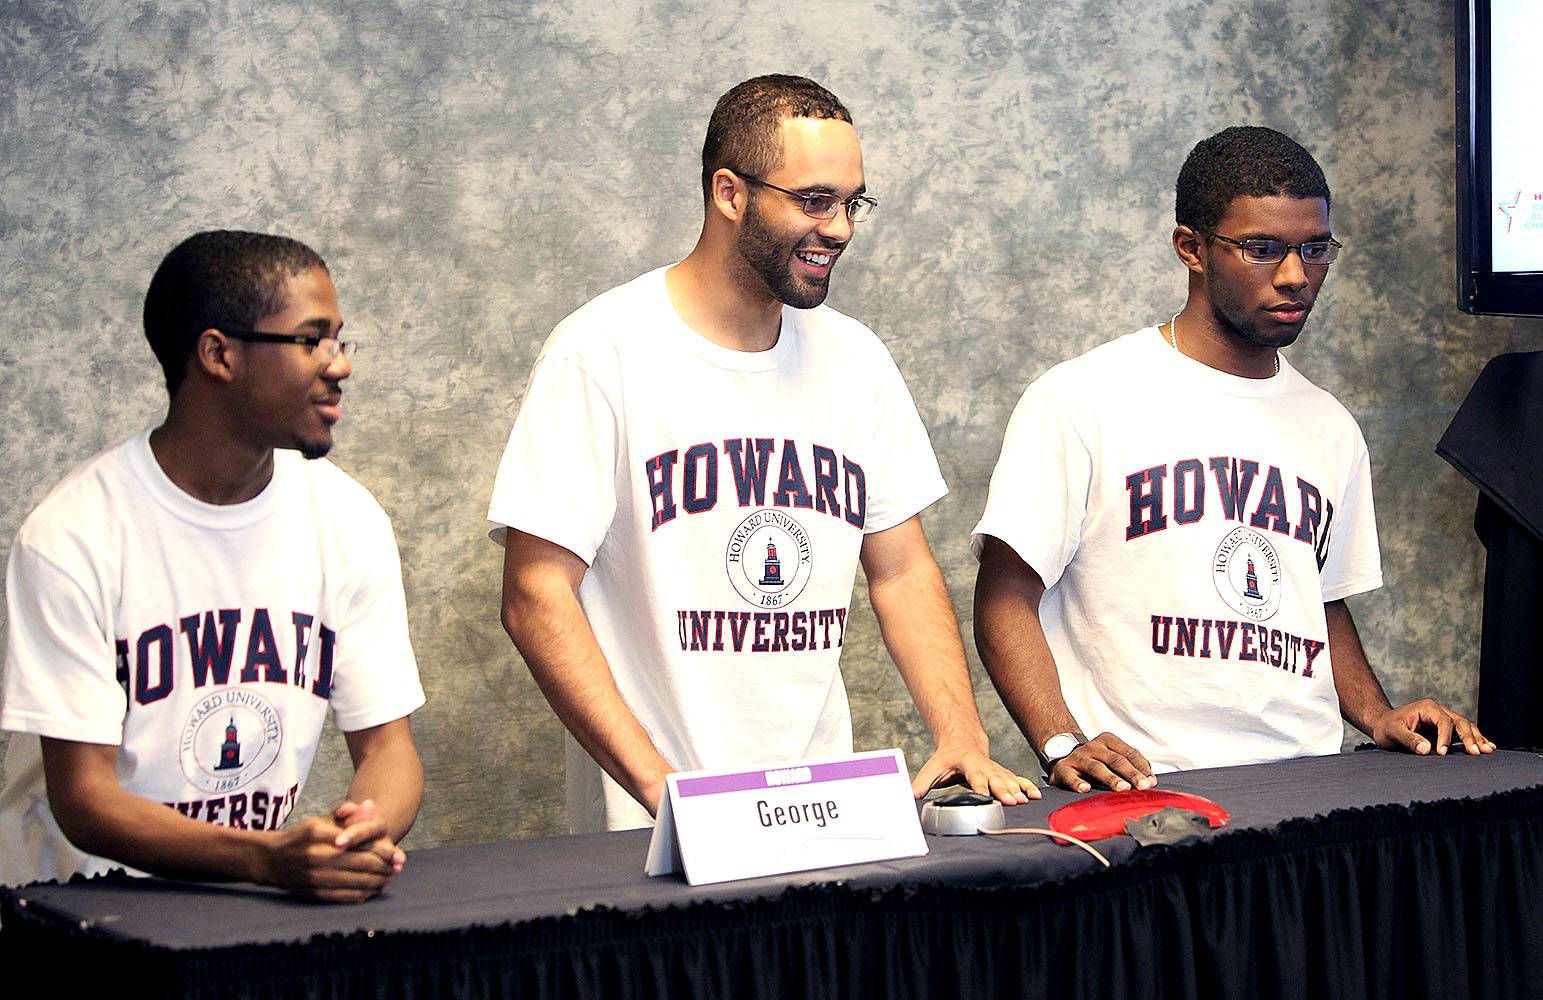 Howard University Ranks at the Top For Beauty and Brains